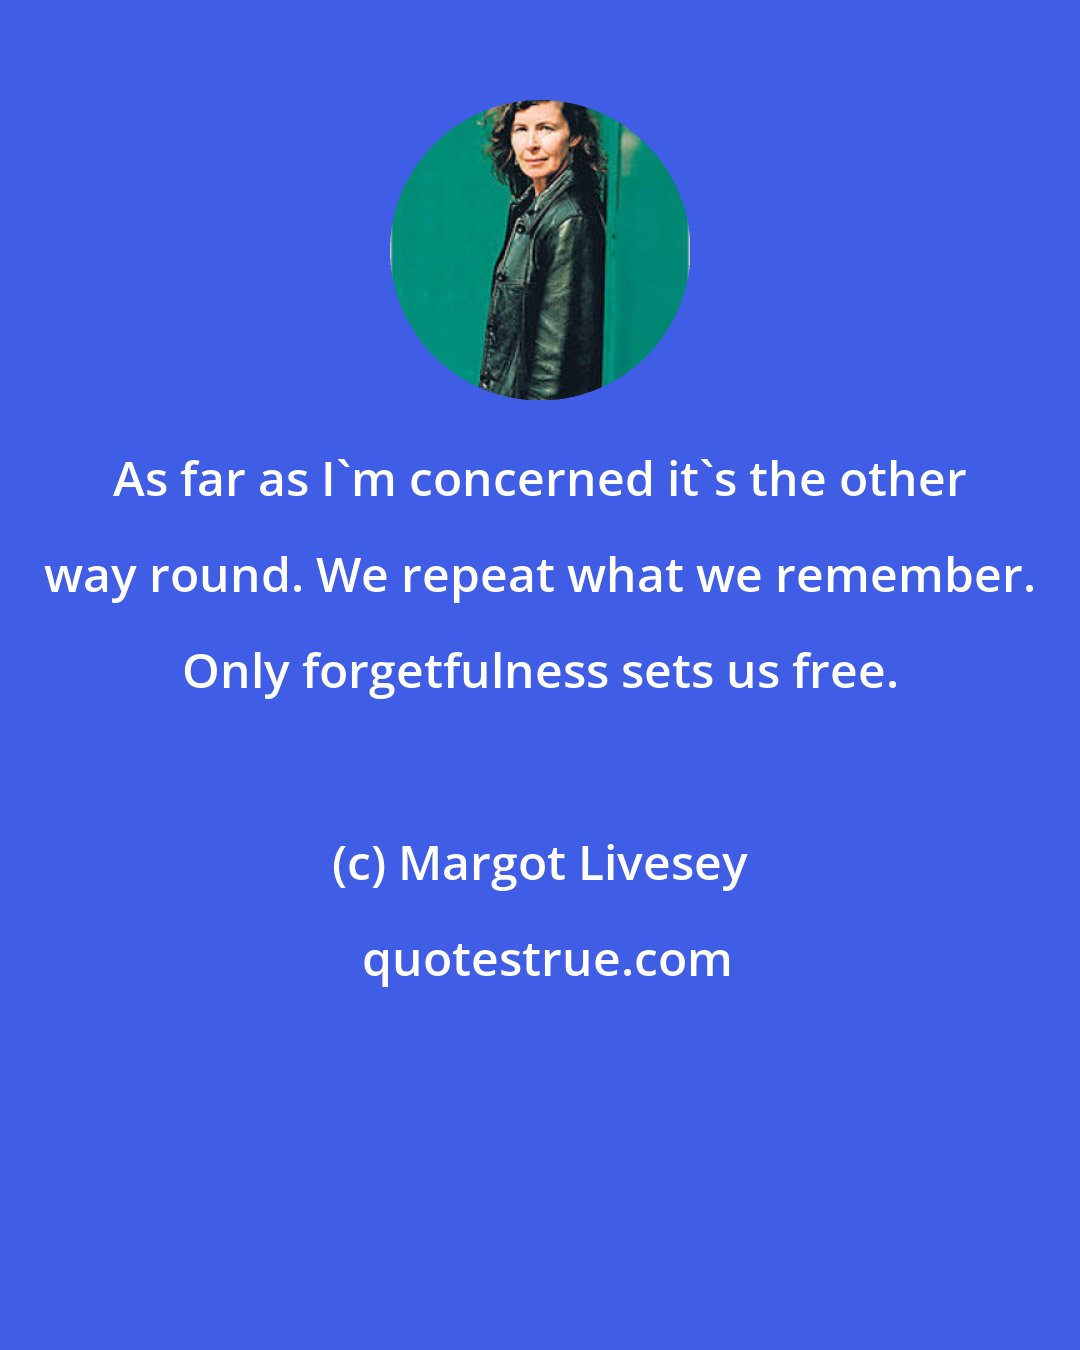 Margot Livesey: As far as I'm concerned it's the other way round. We repeat what we remember. Only forgetfulness sets us free.